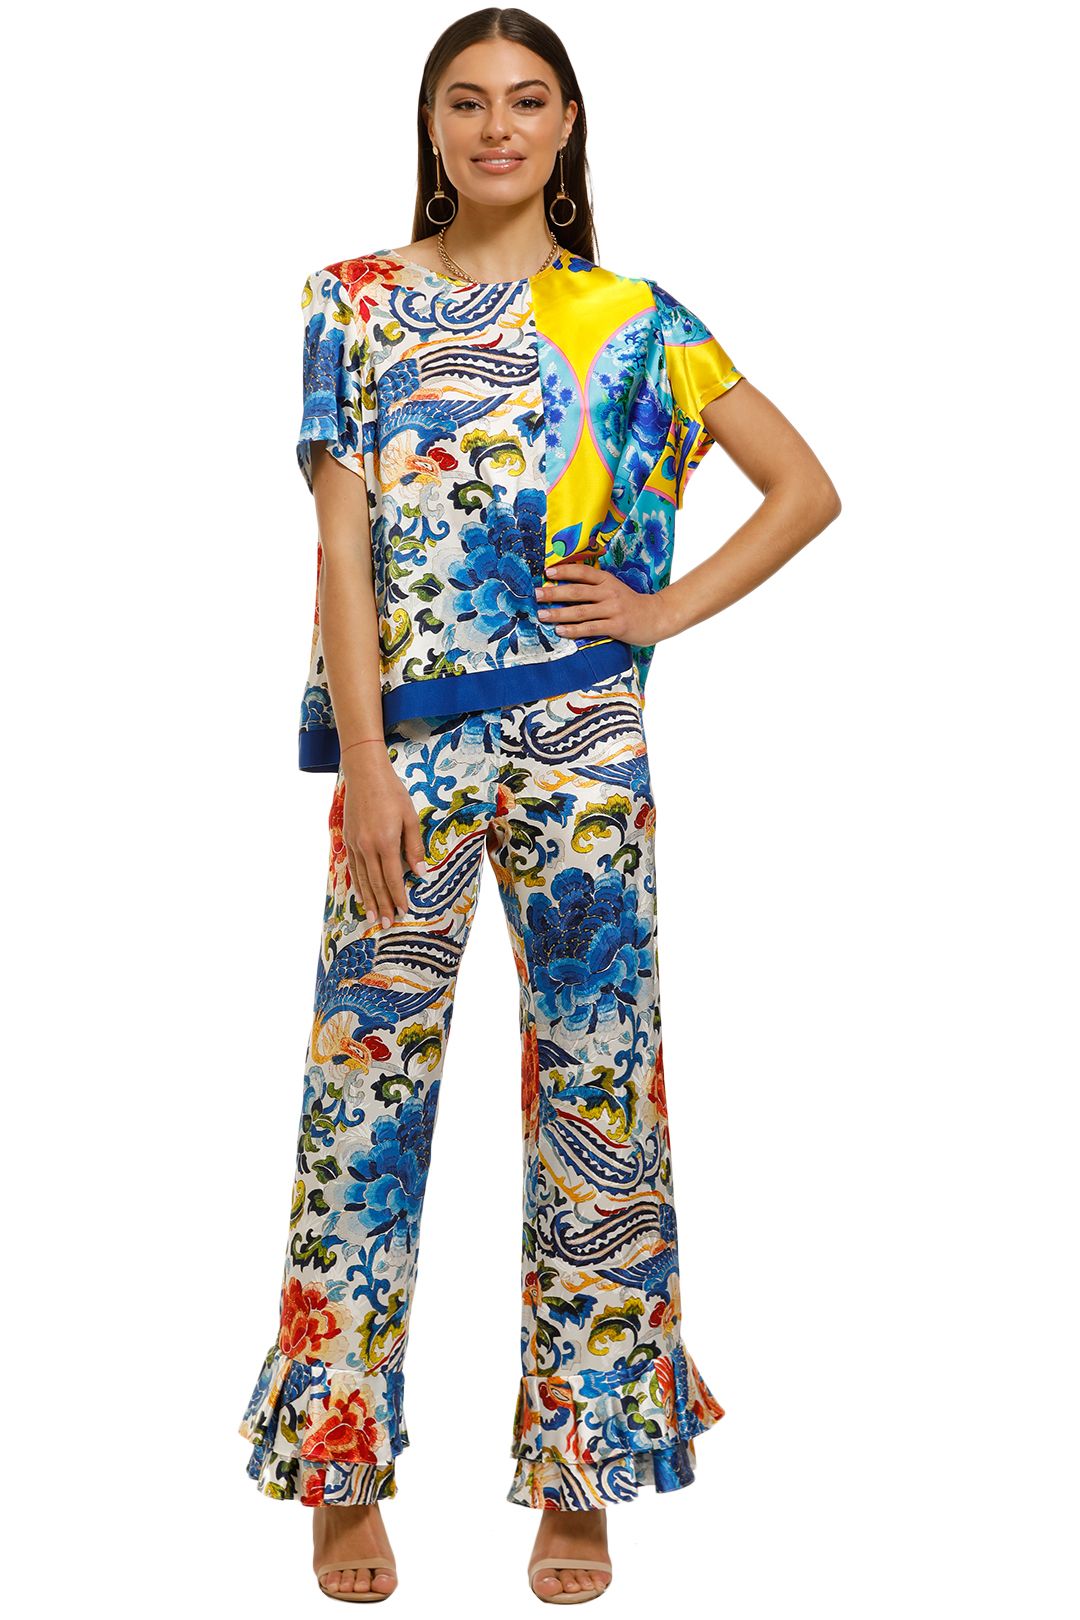 cooper-by-trelise-cooper-best-of-both-worlds-top-yellow-floral-print-front